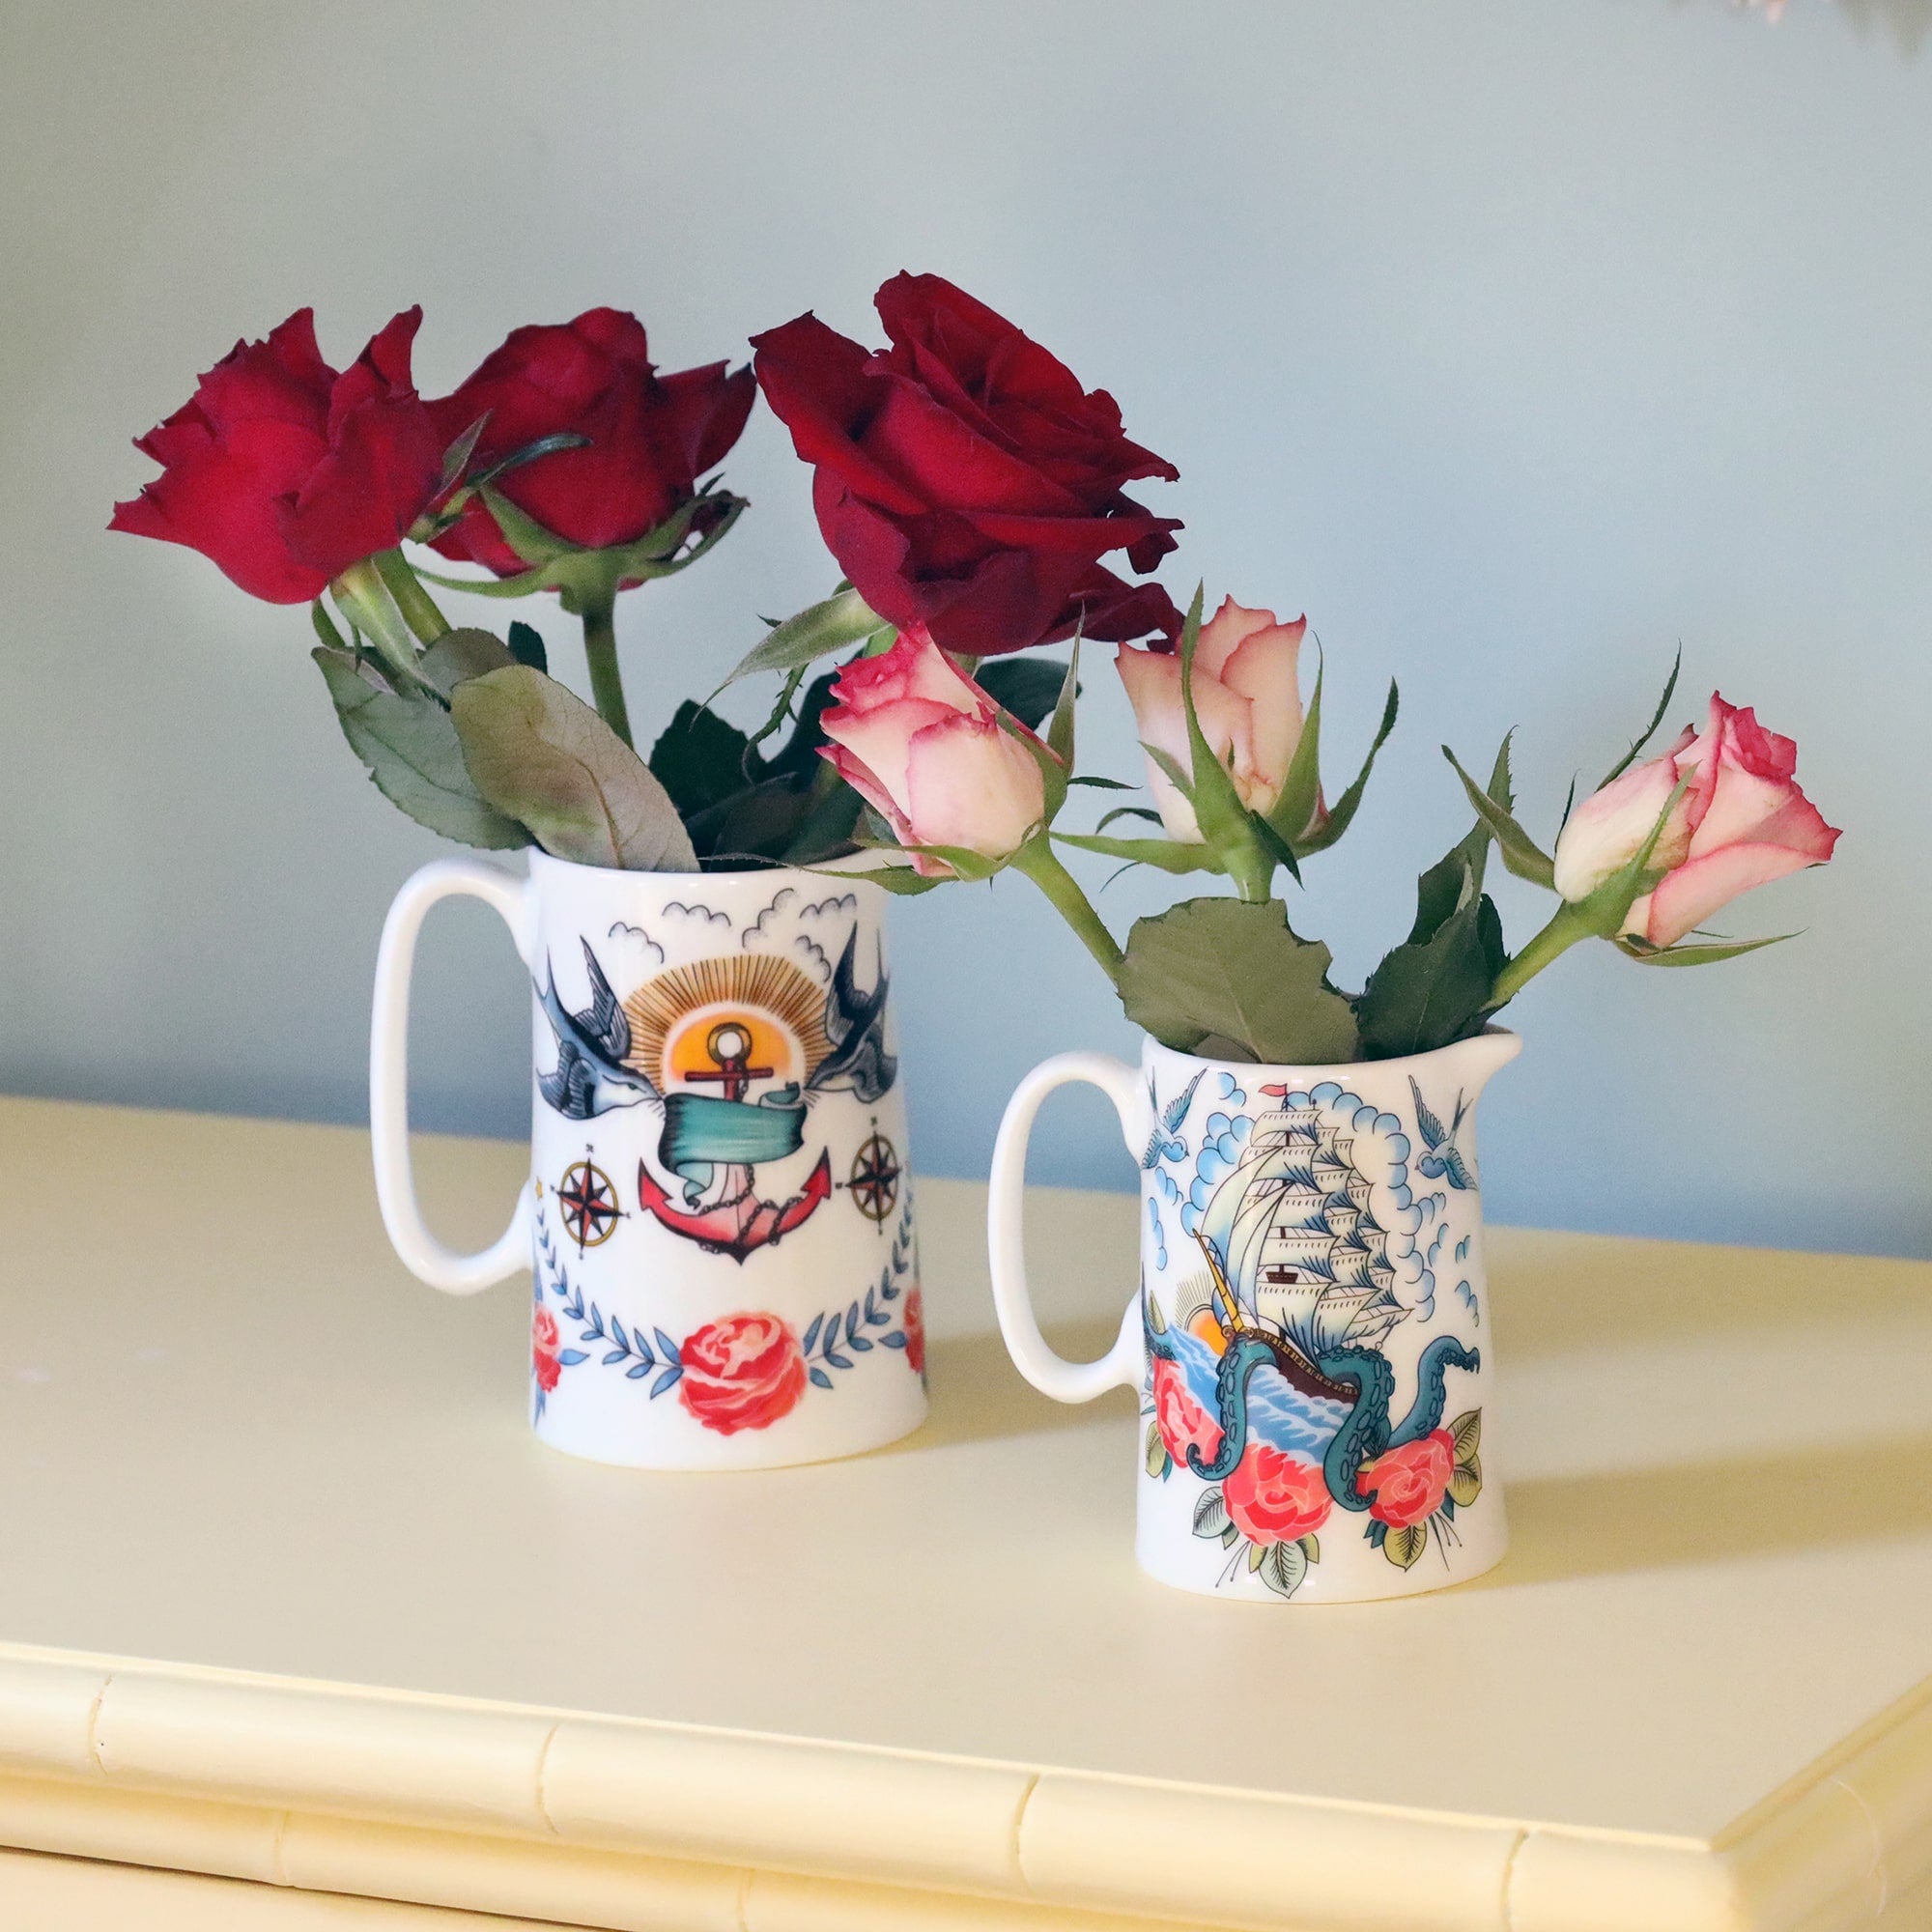 2 white jugs decorated in brightly coloured tattoo inspired patterns of swallow and anchors, ship and kraken and roses. Both are filled with roses one with red and the other with pink and white, sitting on a soft yellow set of drawers and a soft blue wall behind.